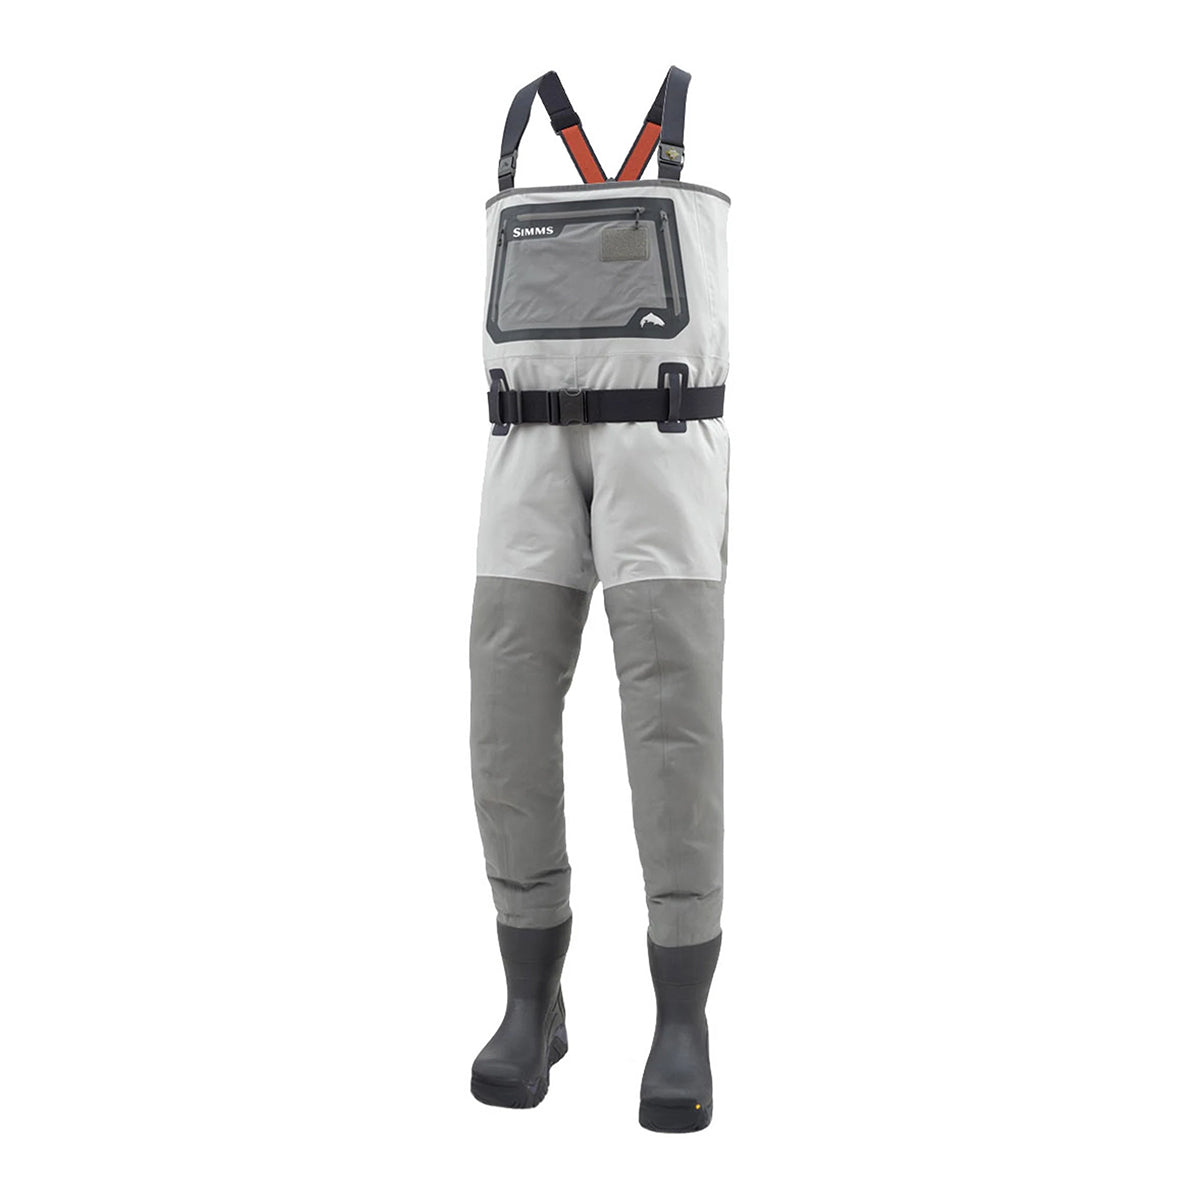 Simms Fishing Men's G3 Guide Wader - Clearance Breathable wa